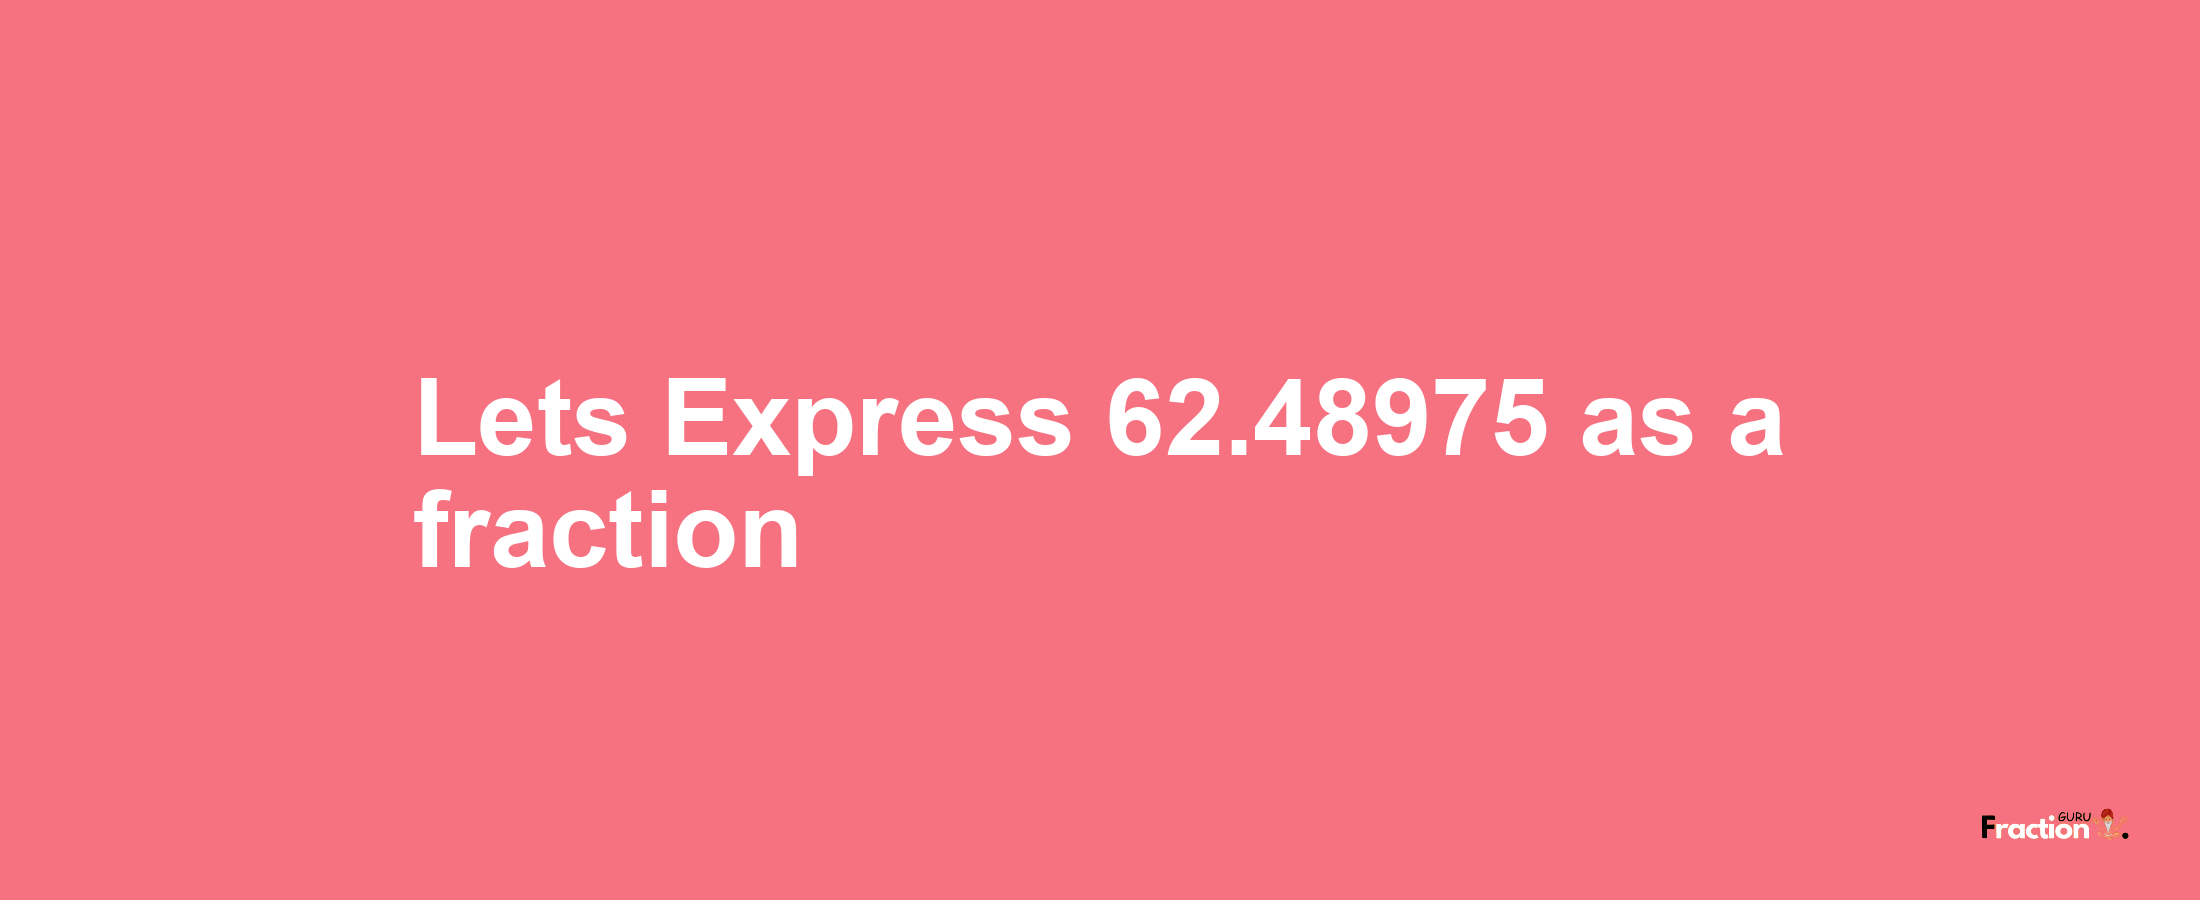 Lets Express 62.48975 as afraction